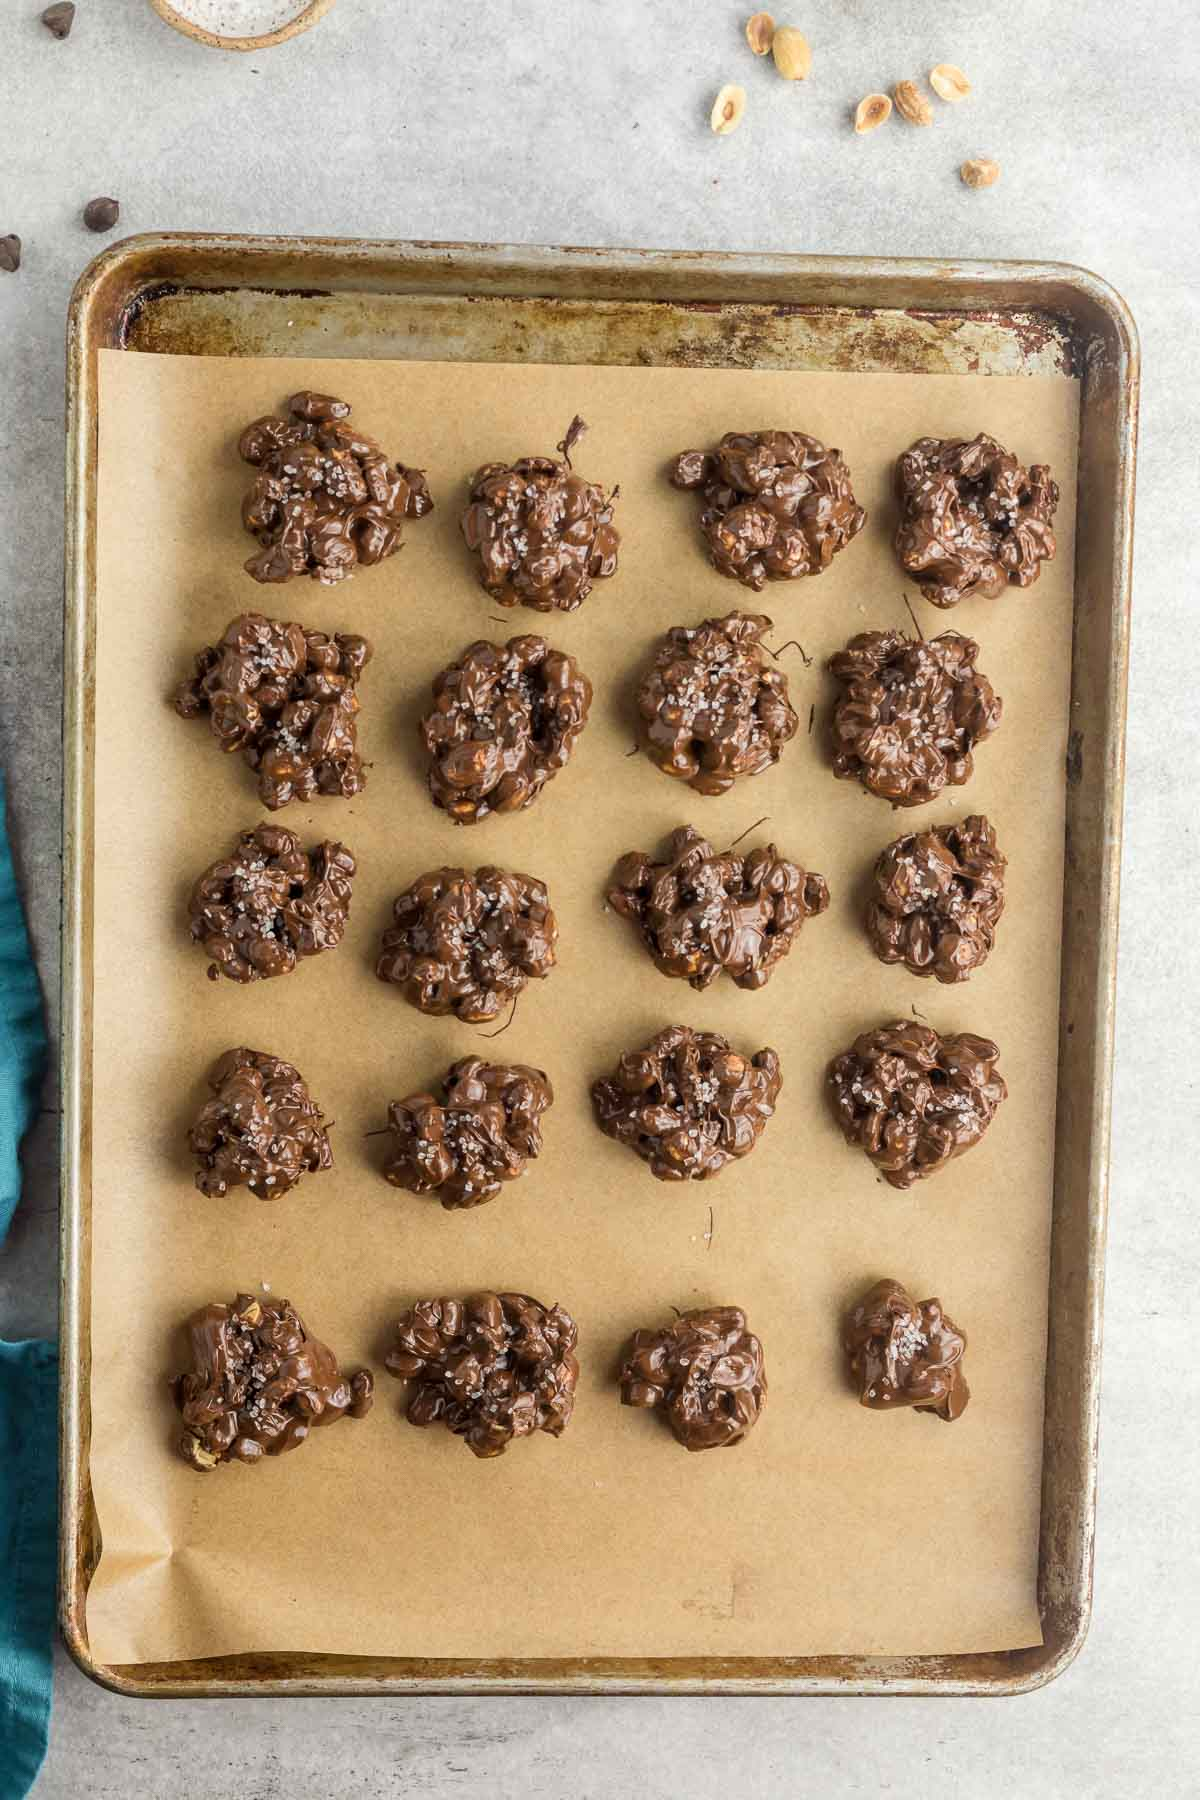 chocolate peanut clusters topped with sea salt on parchment paper baking sheet